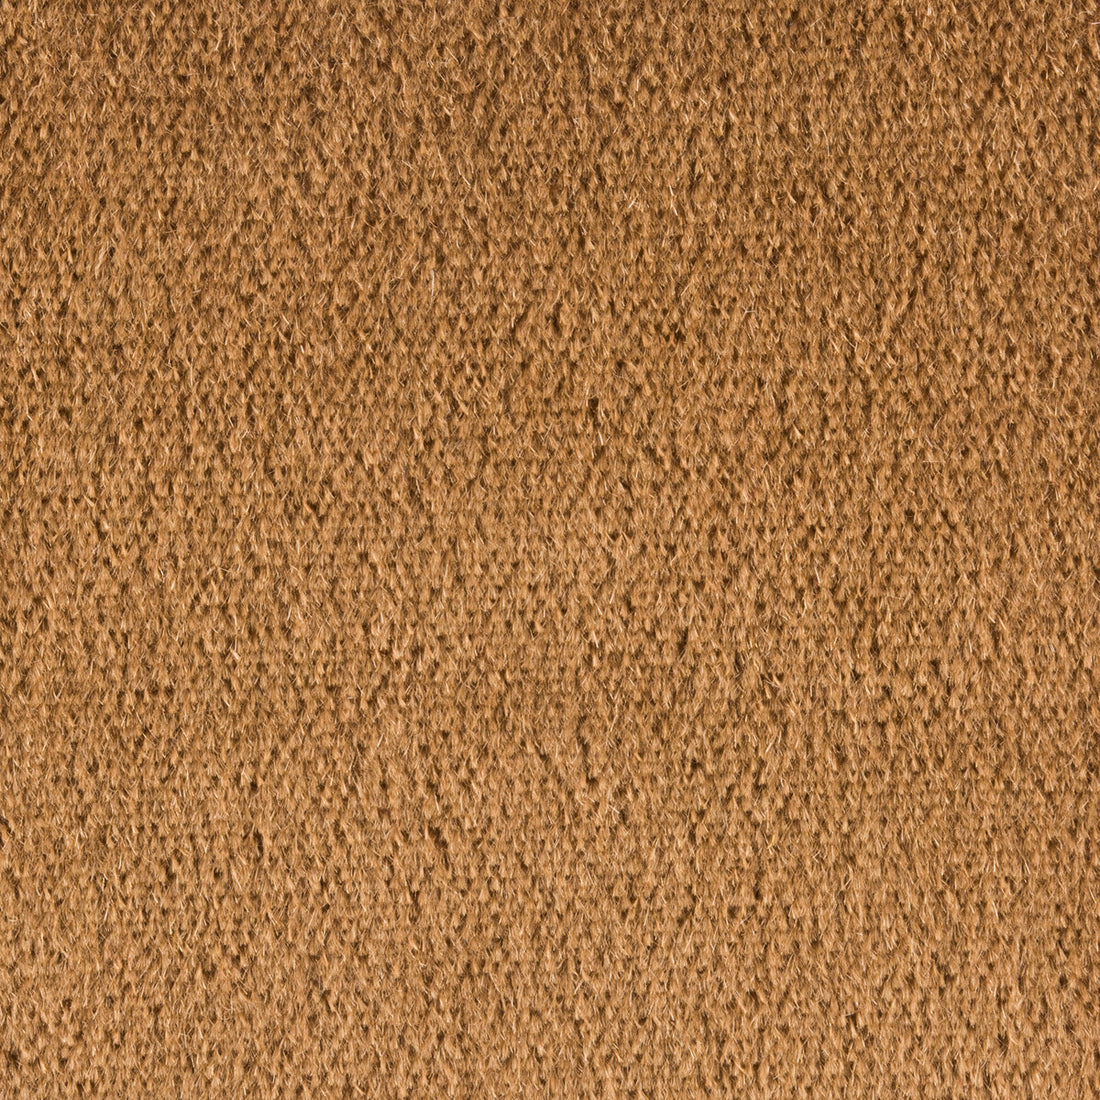 Autun Mohair Velvet fabric in walnut color - pattern BR-89778.880.0 - by Brunschwig &amp; Fils